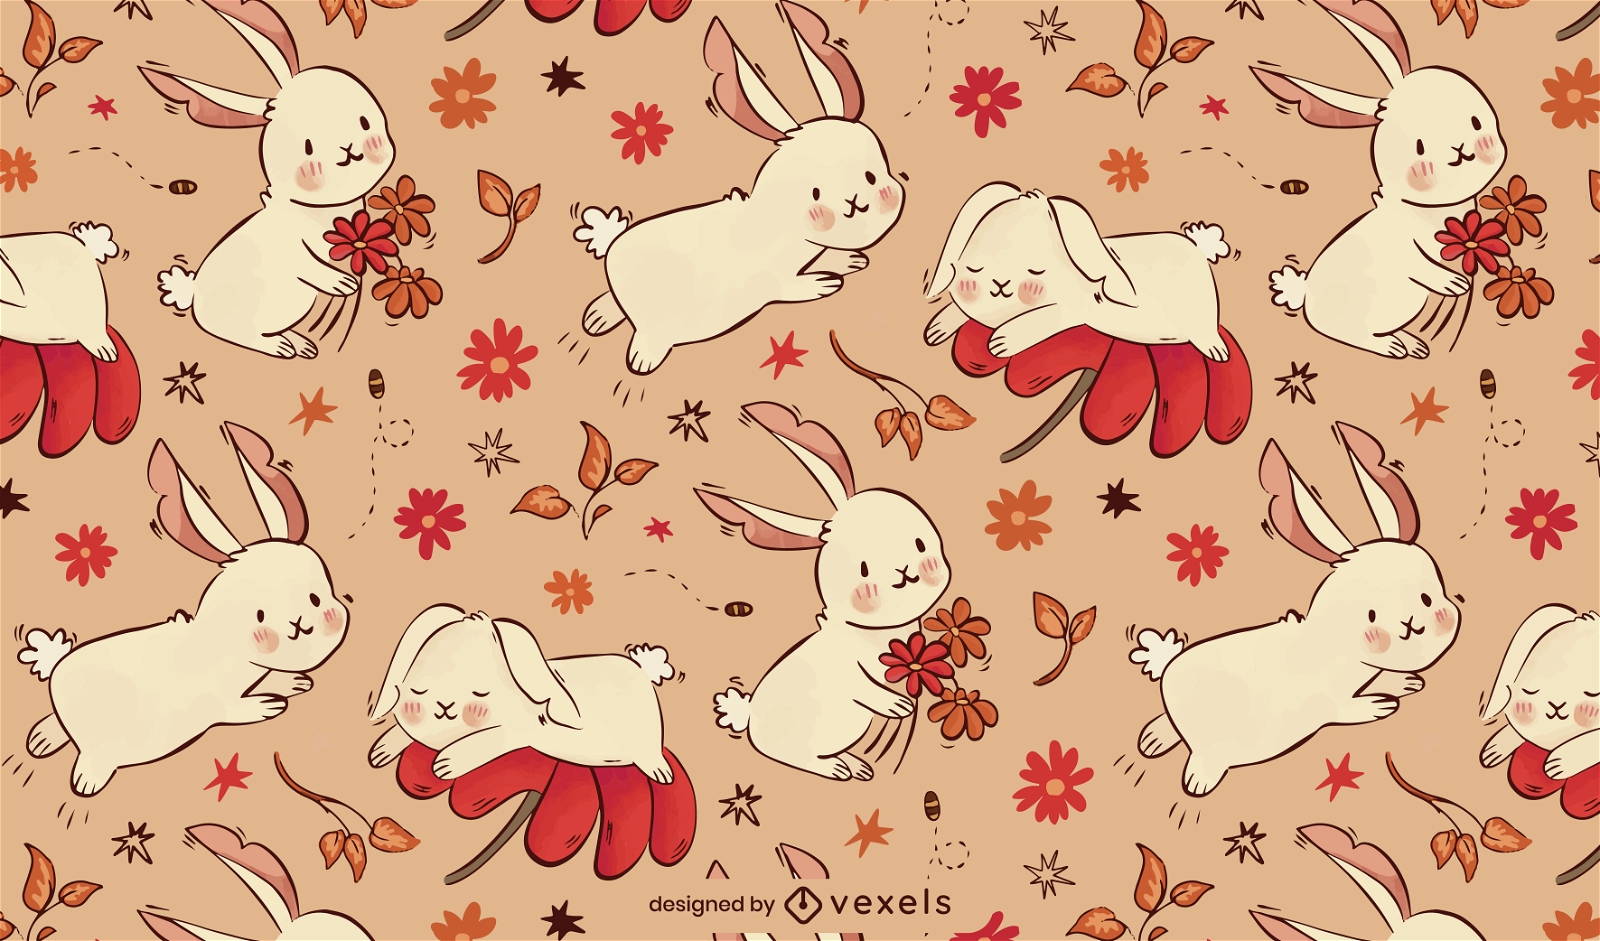 Cute rabbit and flowers pattern design